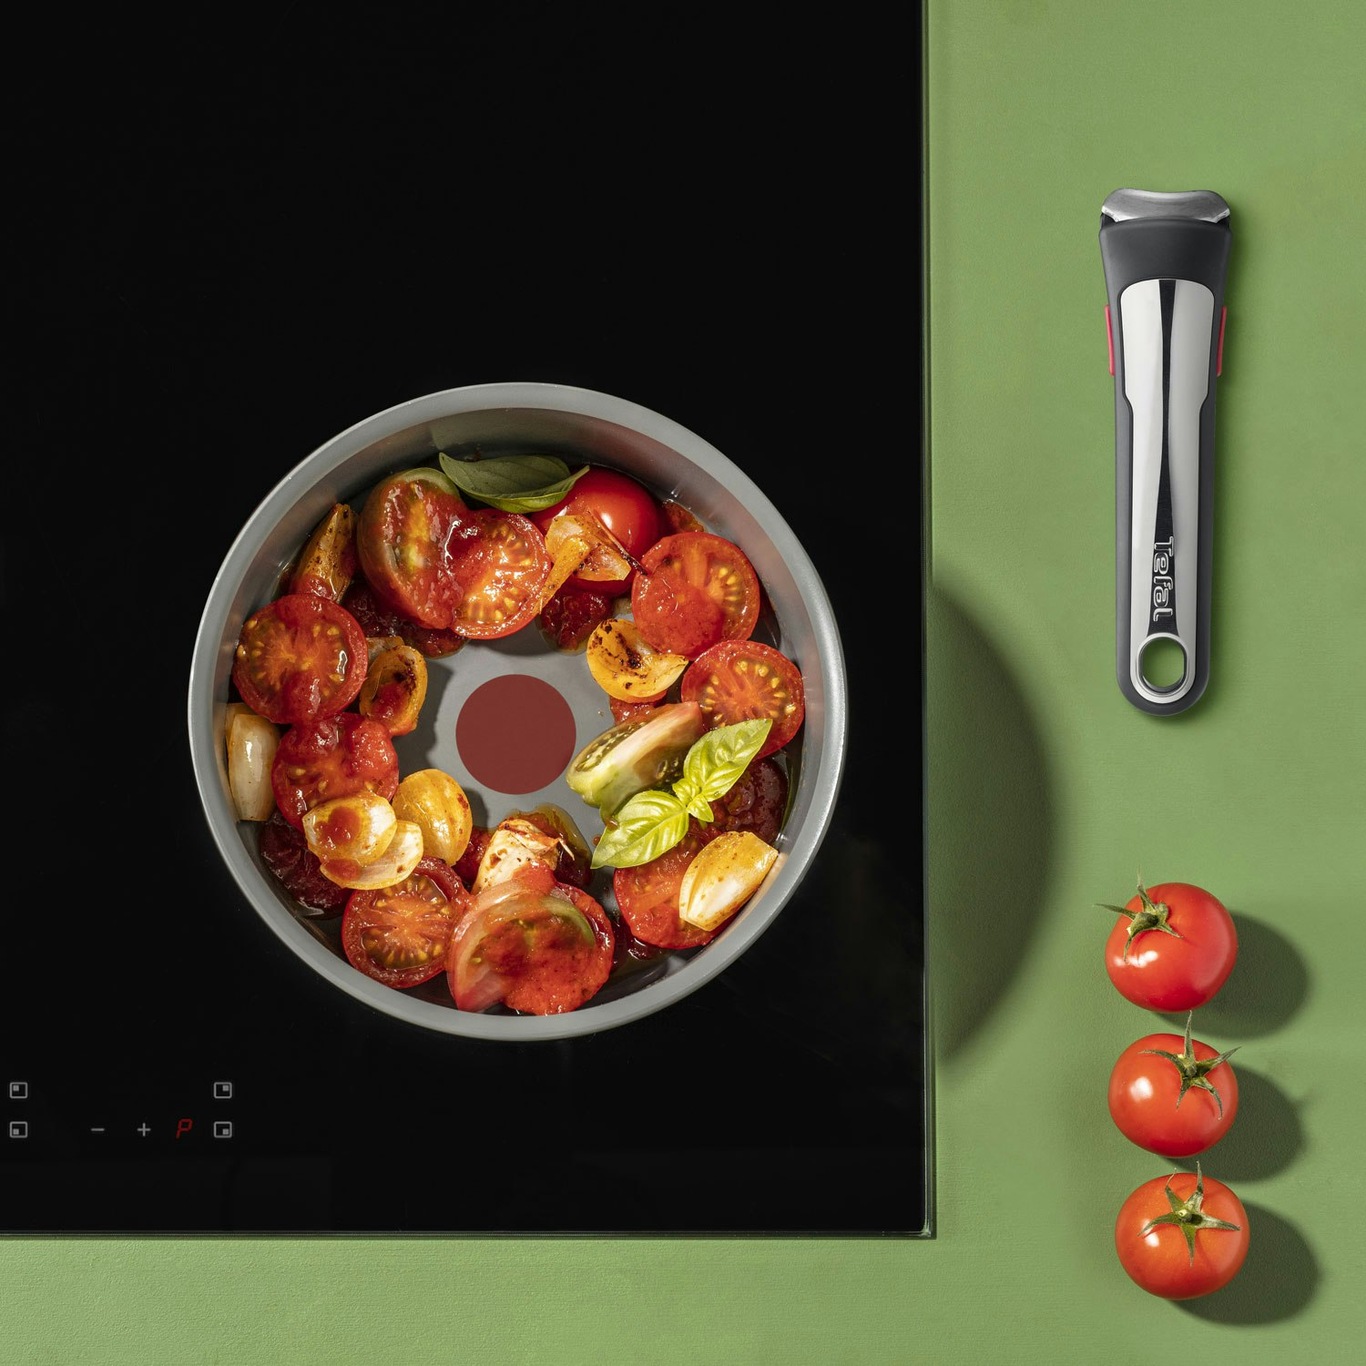 PRODUCT REVIEW: Tefal Ingenio range - The Graphic Foodie